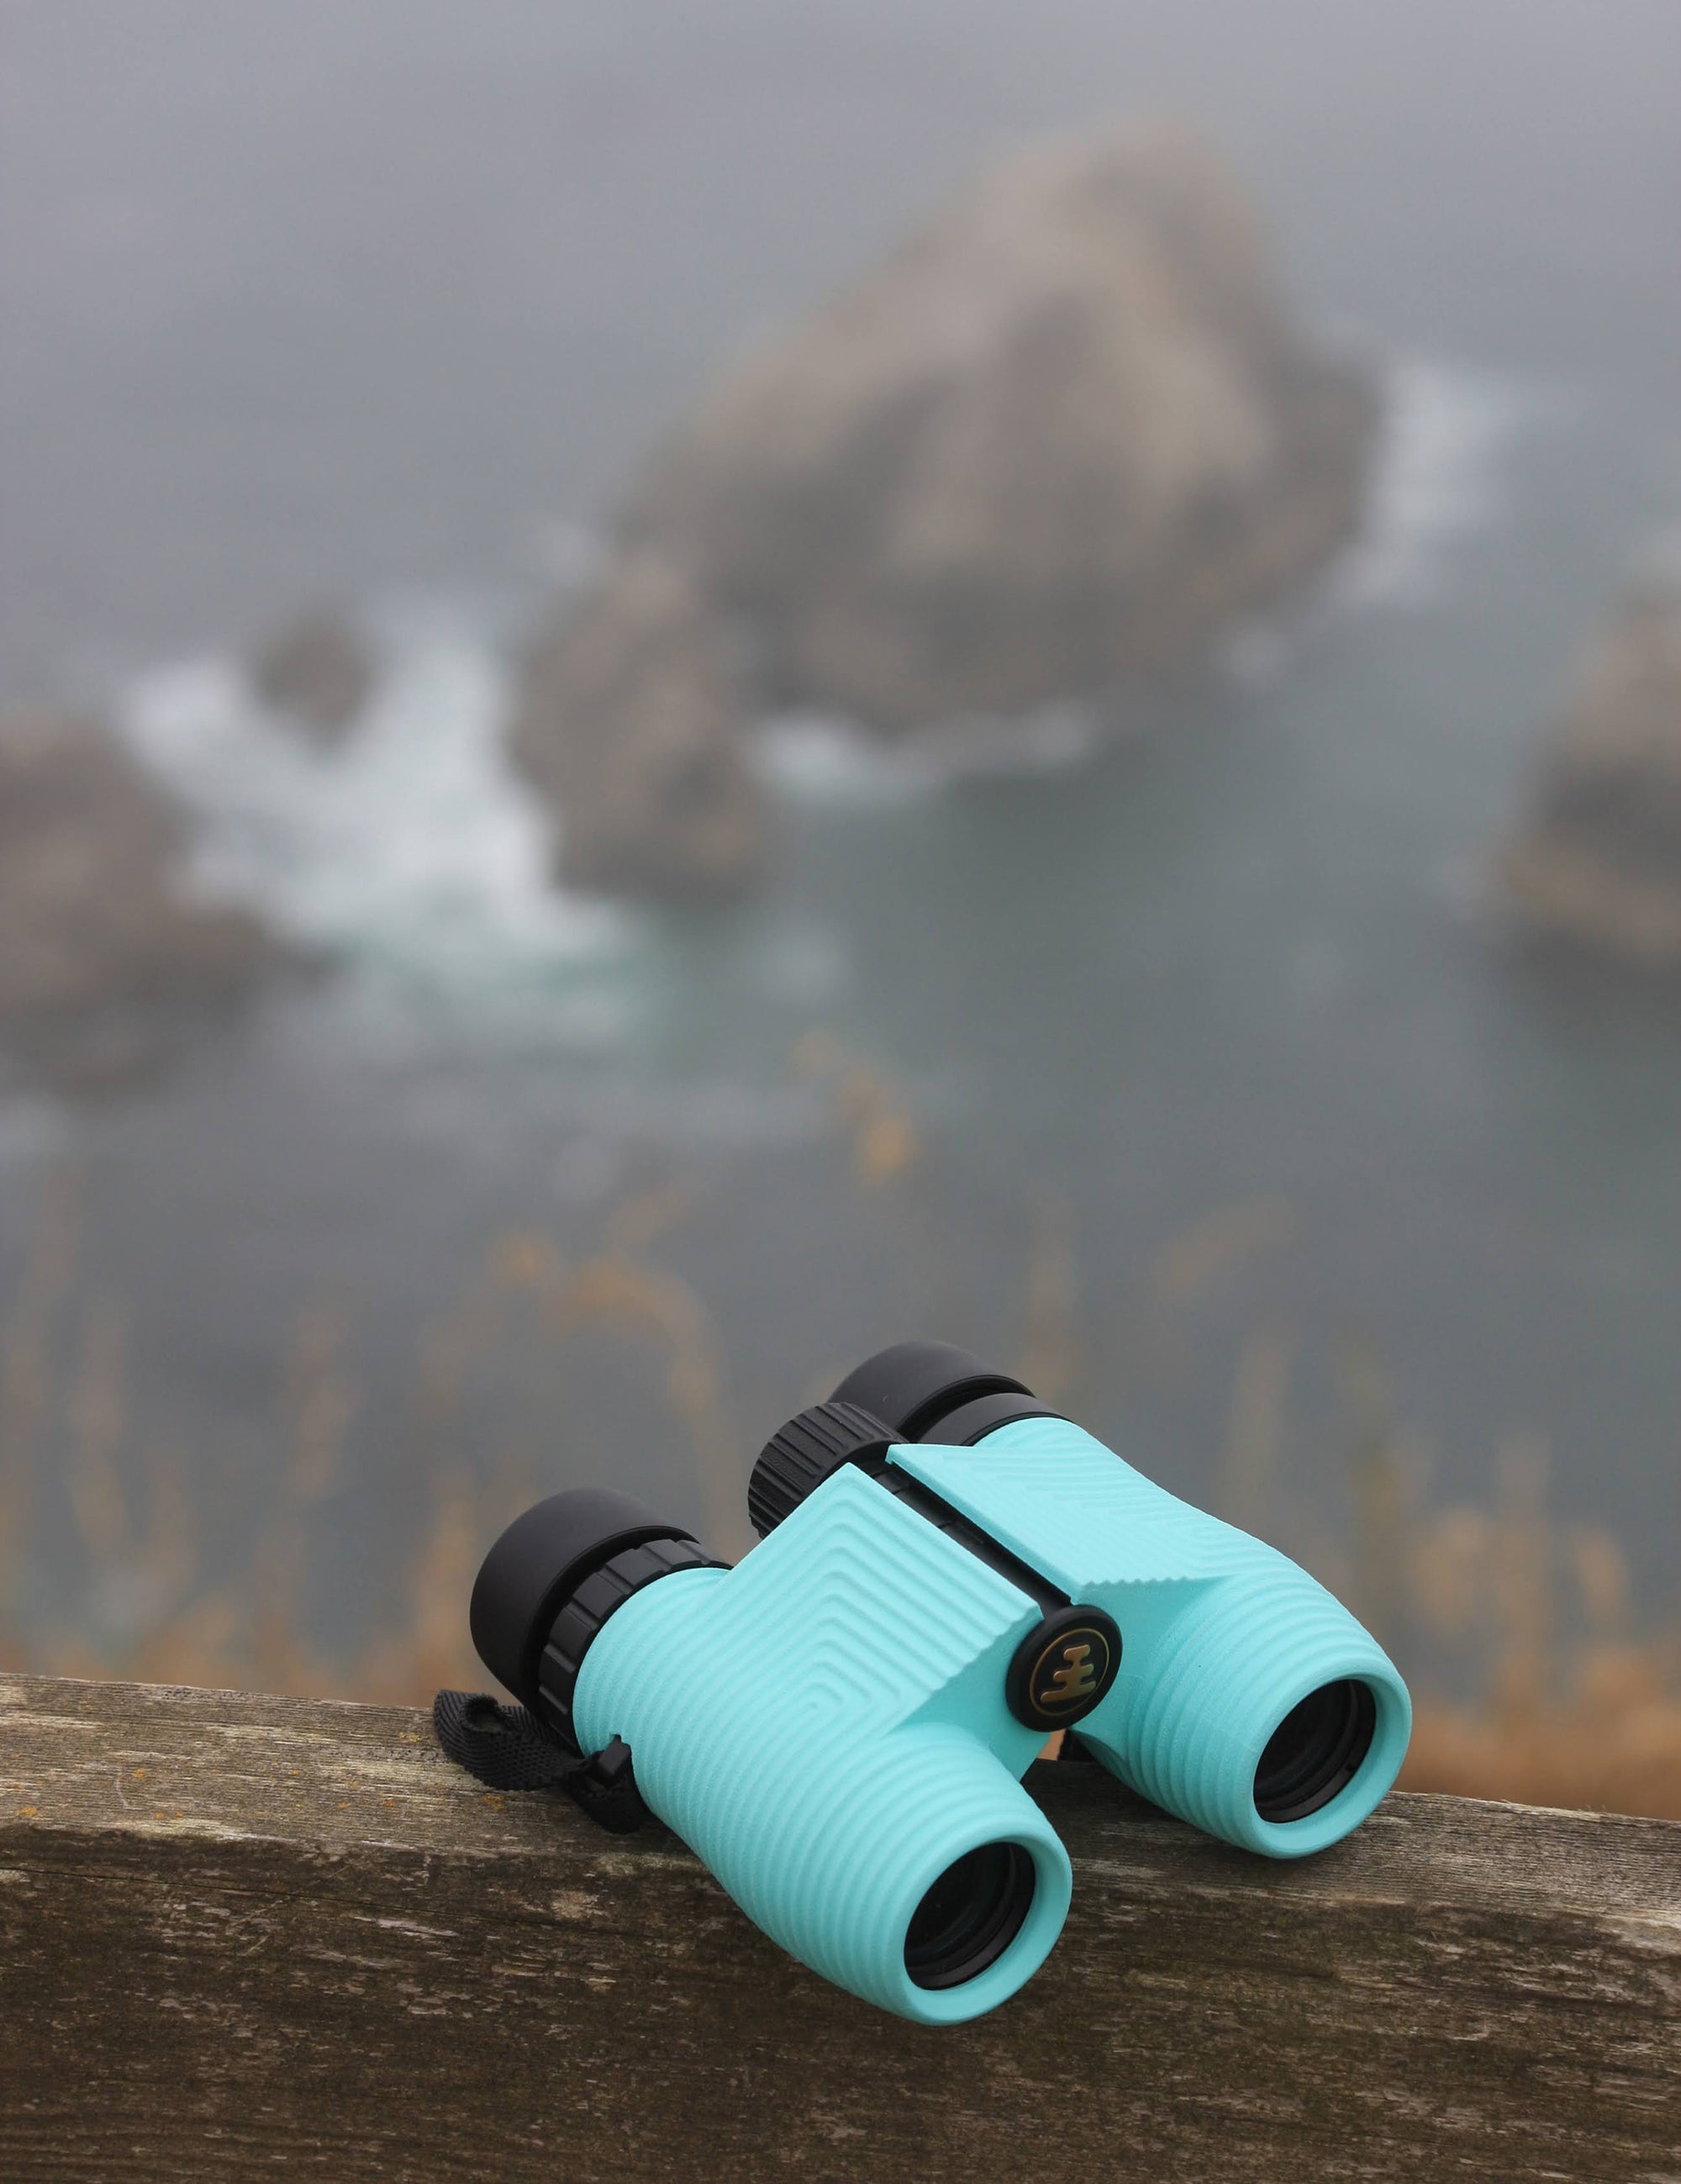 Nocs compact fogproof and waterproof binoculars propped up on a cliff overlooking the ocean